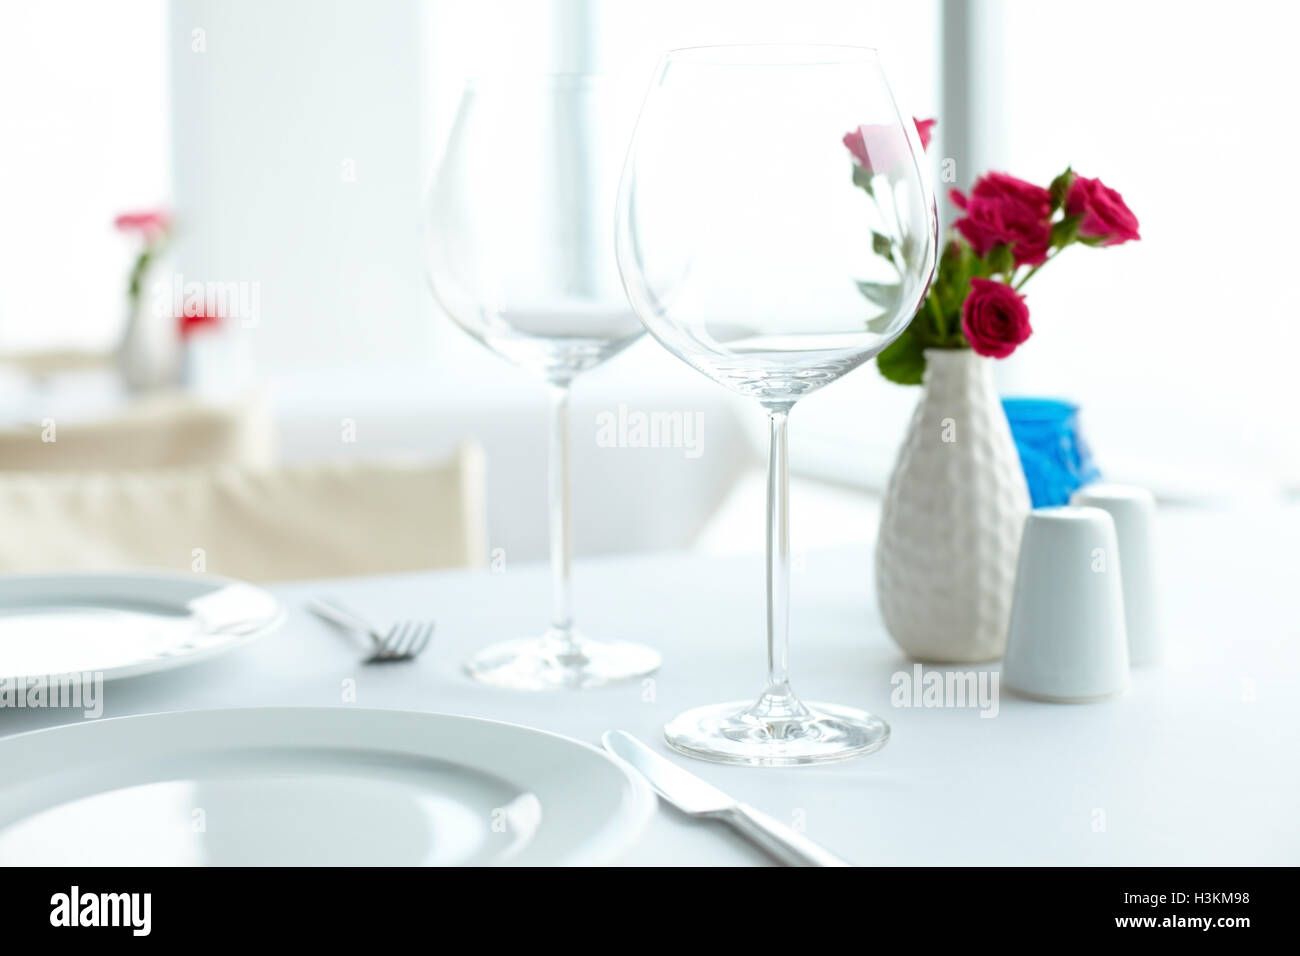 Romantic table appointments Stock Photo